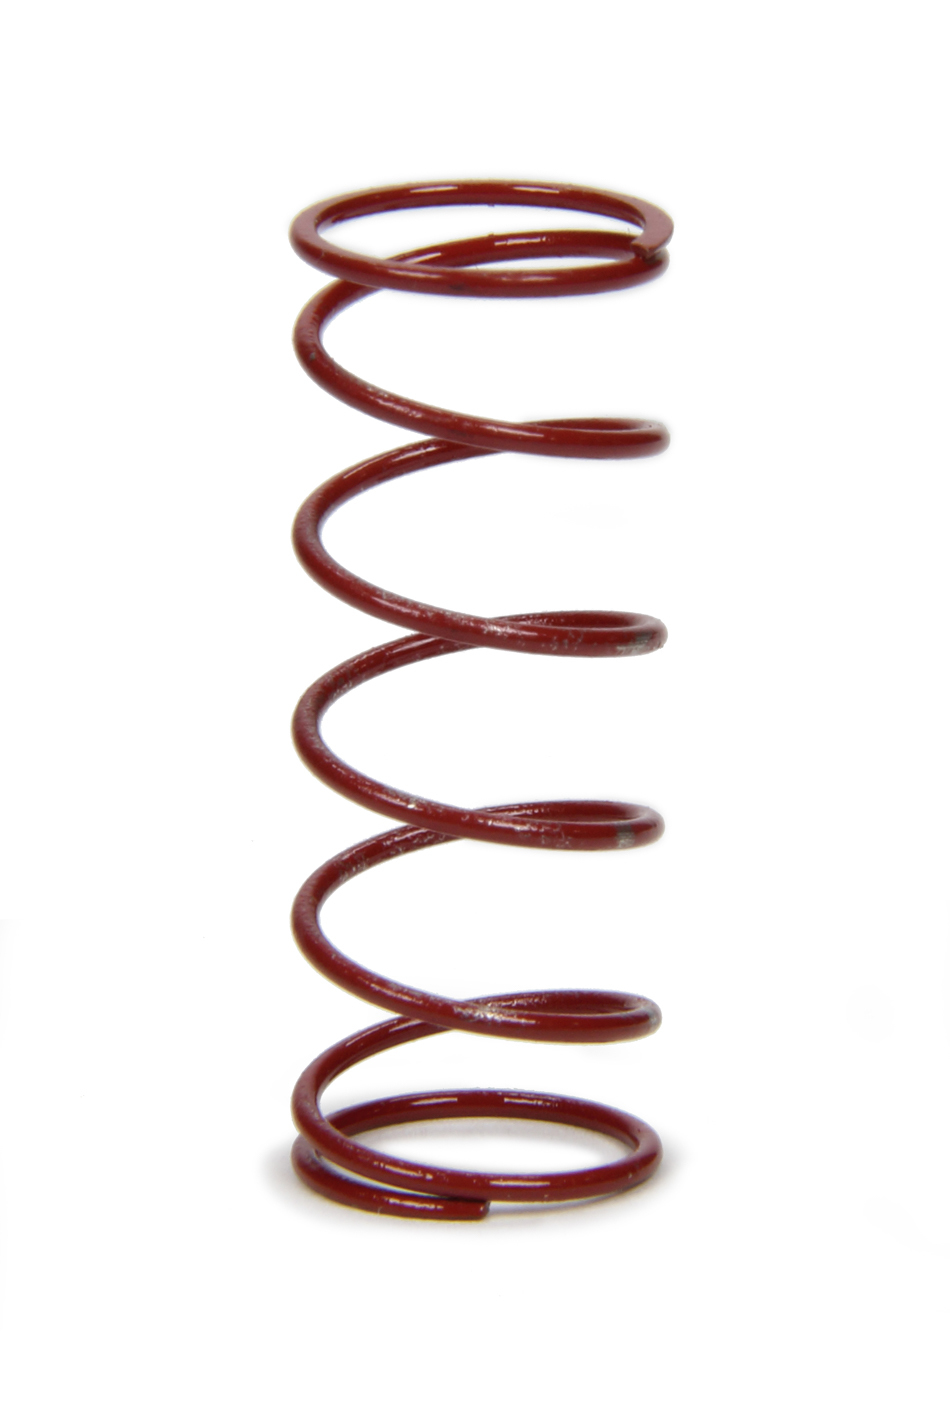 Conroy Bleeders CPC-022 Tire Bleeder Spring, 3 to 8 psi, Stainless, Red Paint, Conroy Diaphragm Bleeder, Each